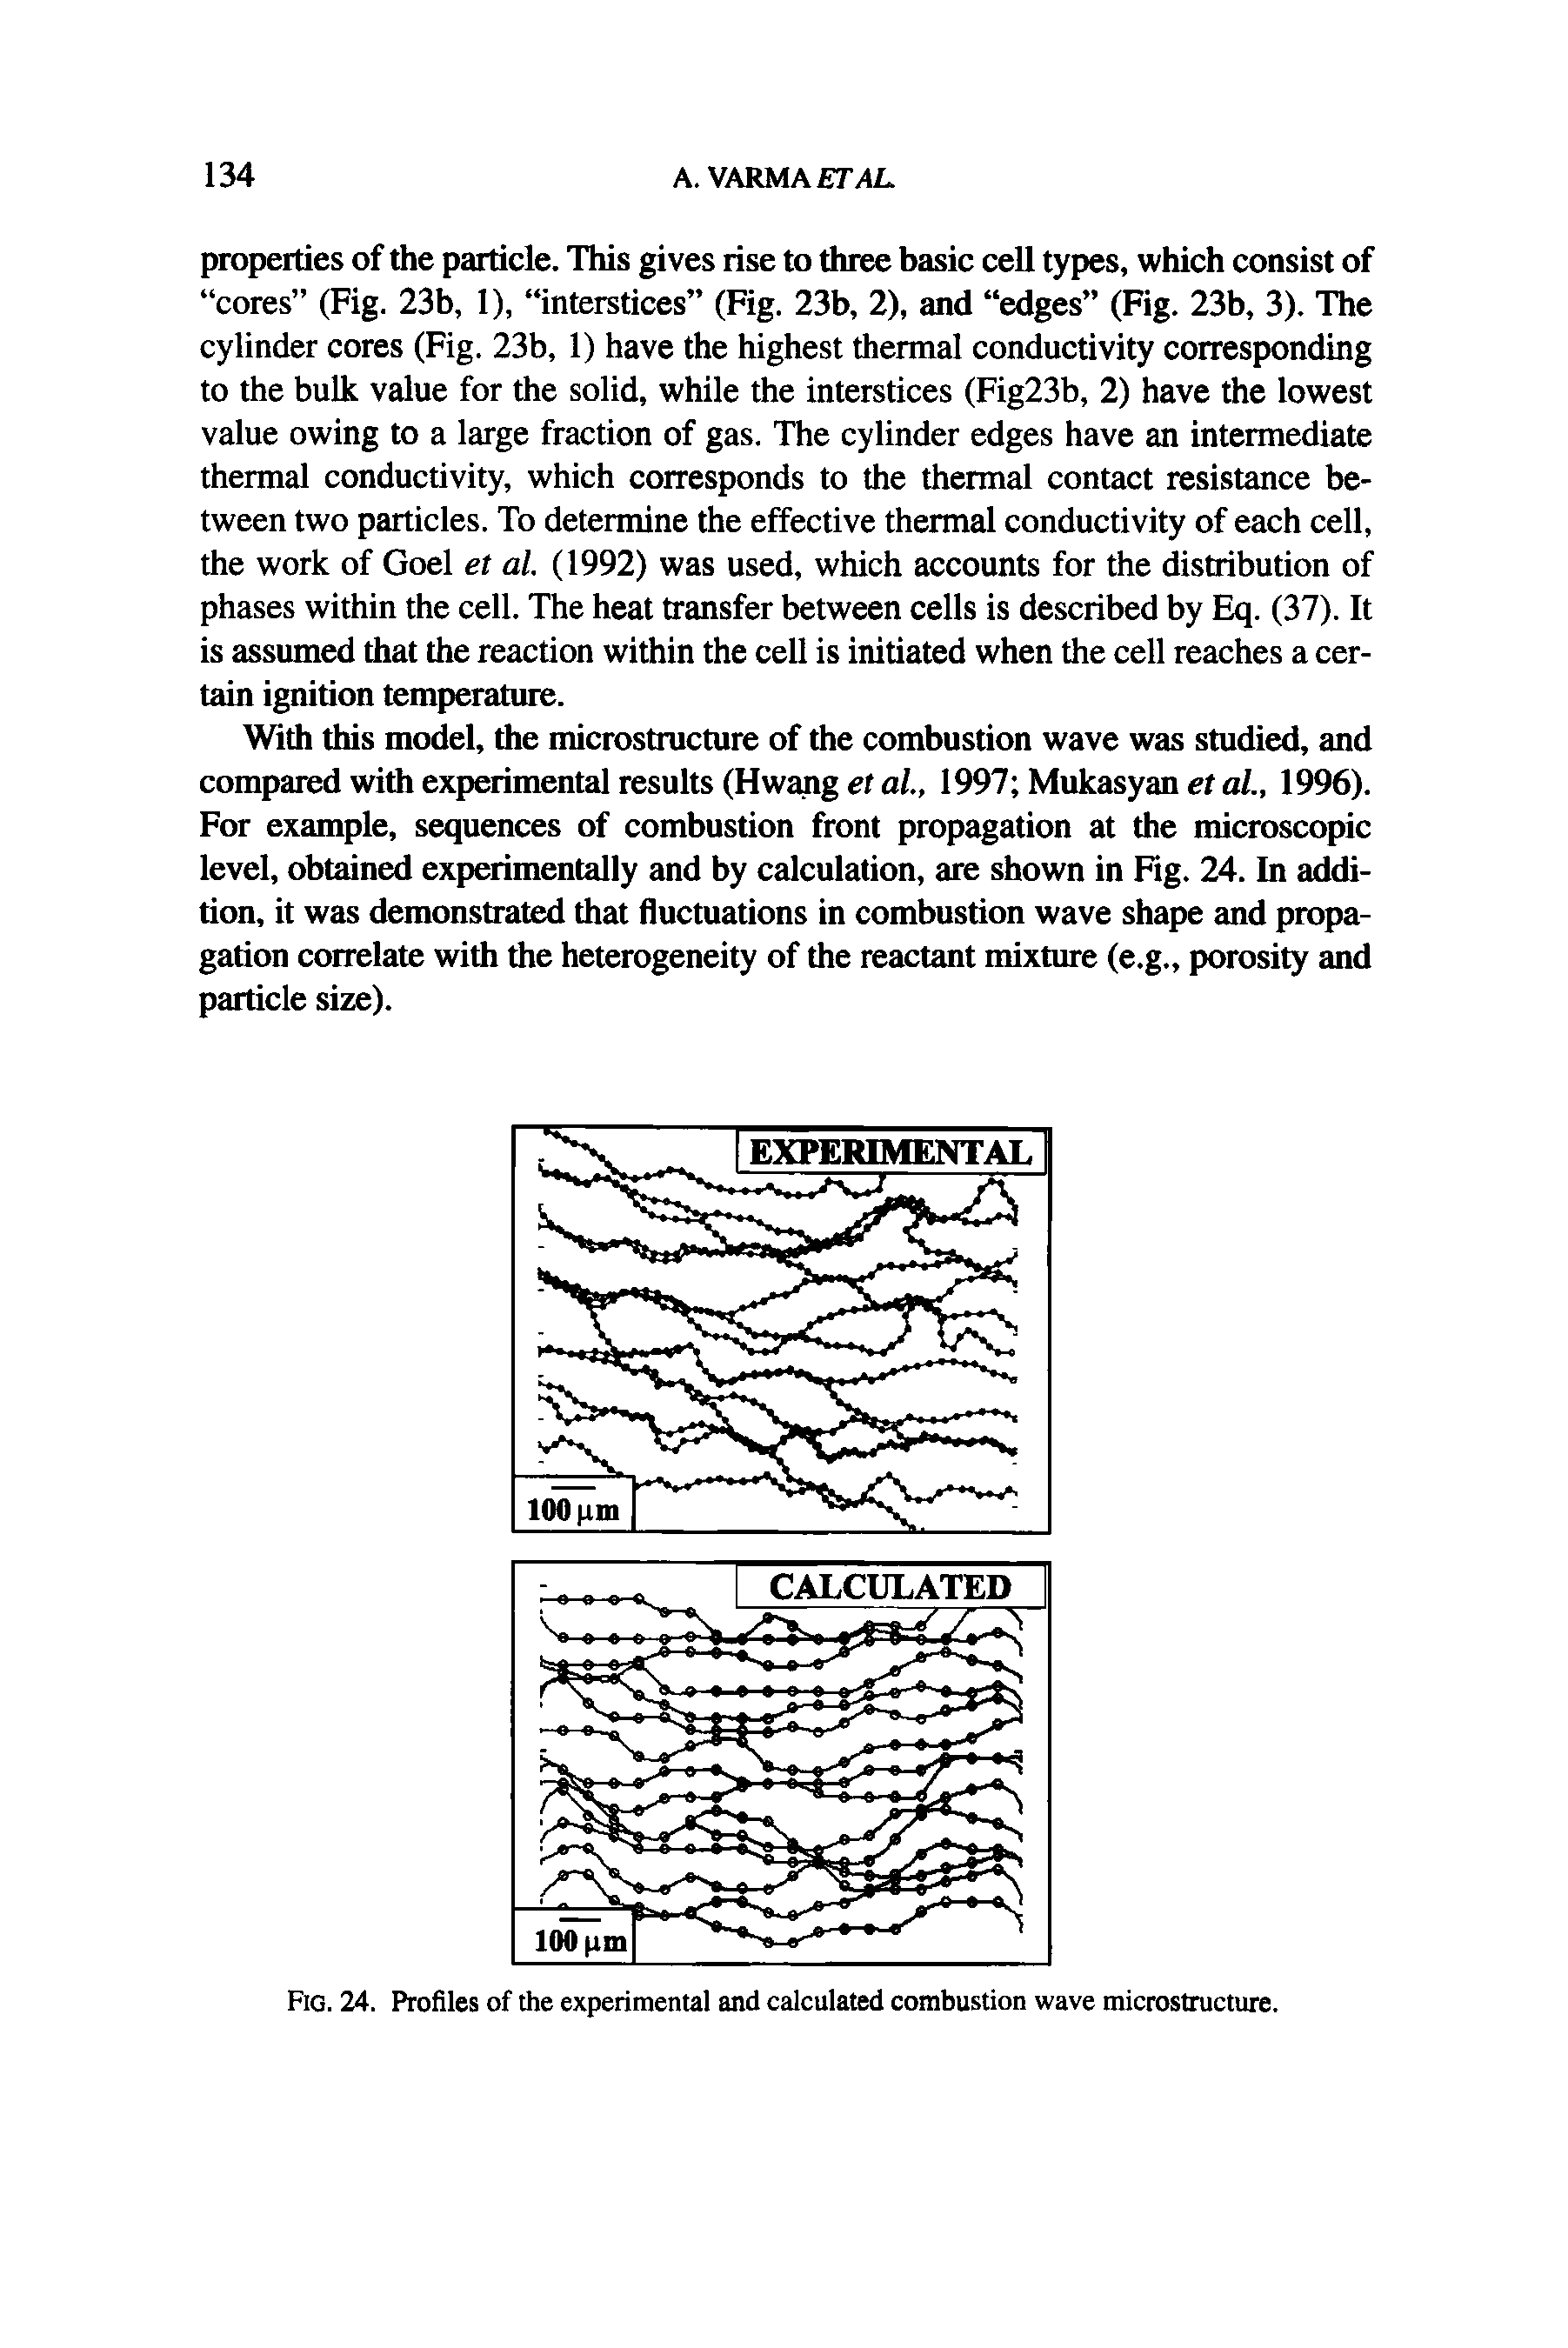 Fig. 24. Profiles of the experimental and calculated combustion wave microstructure.